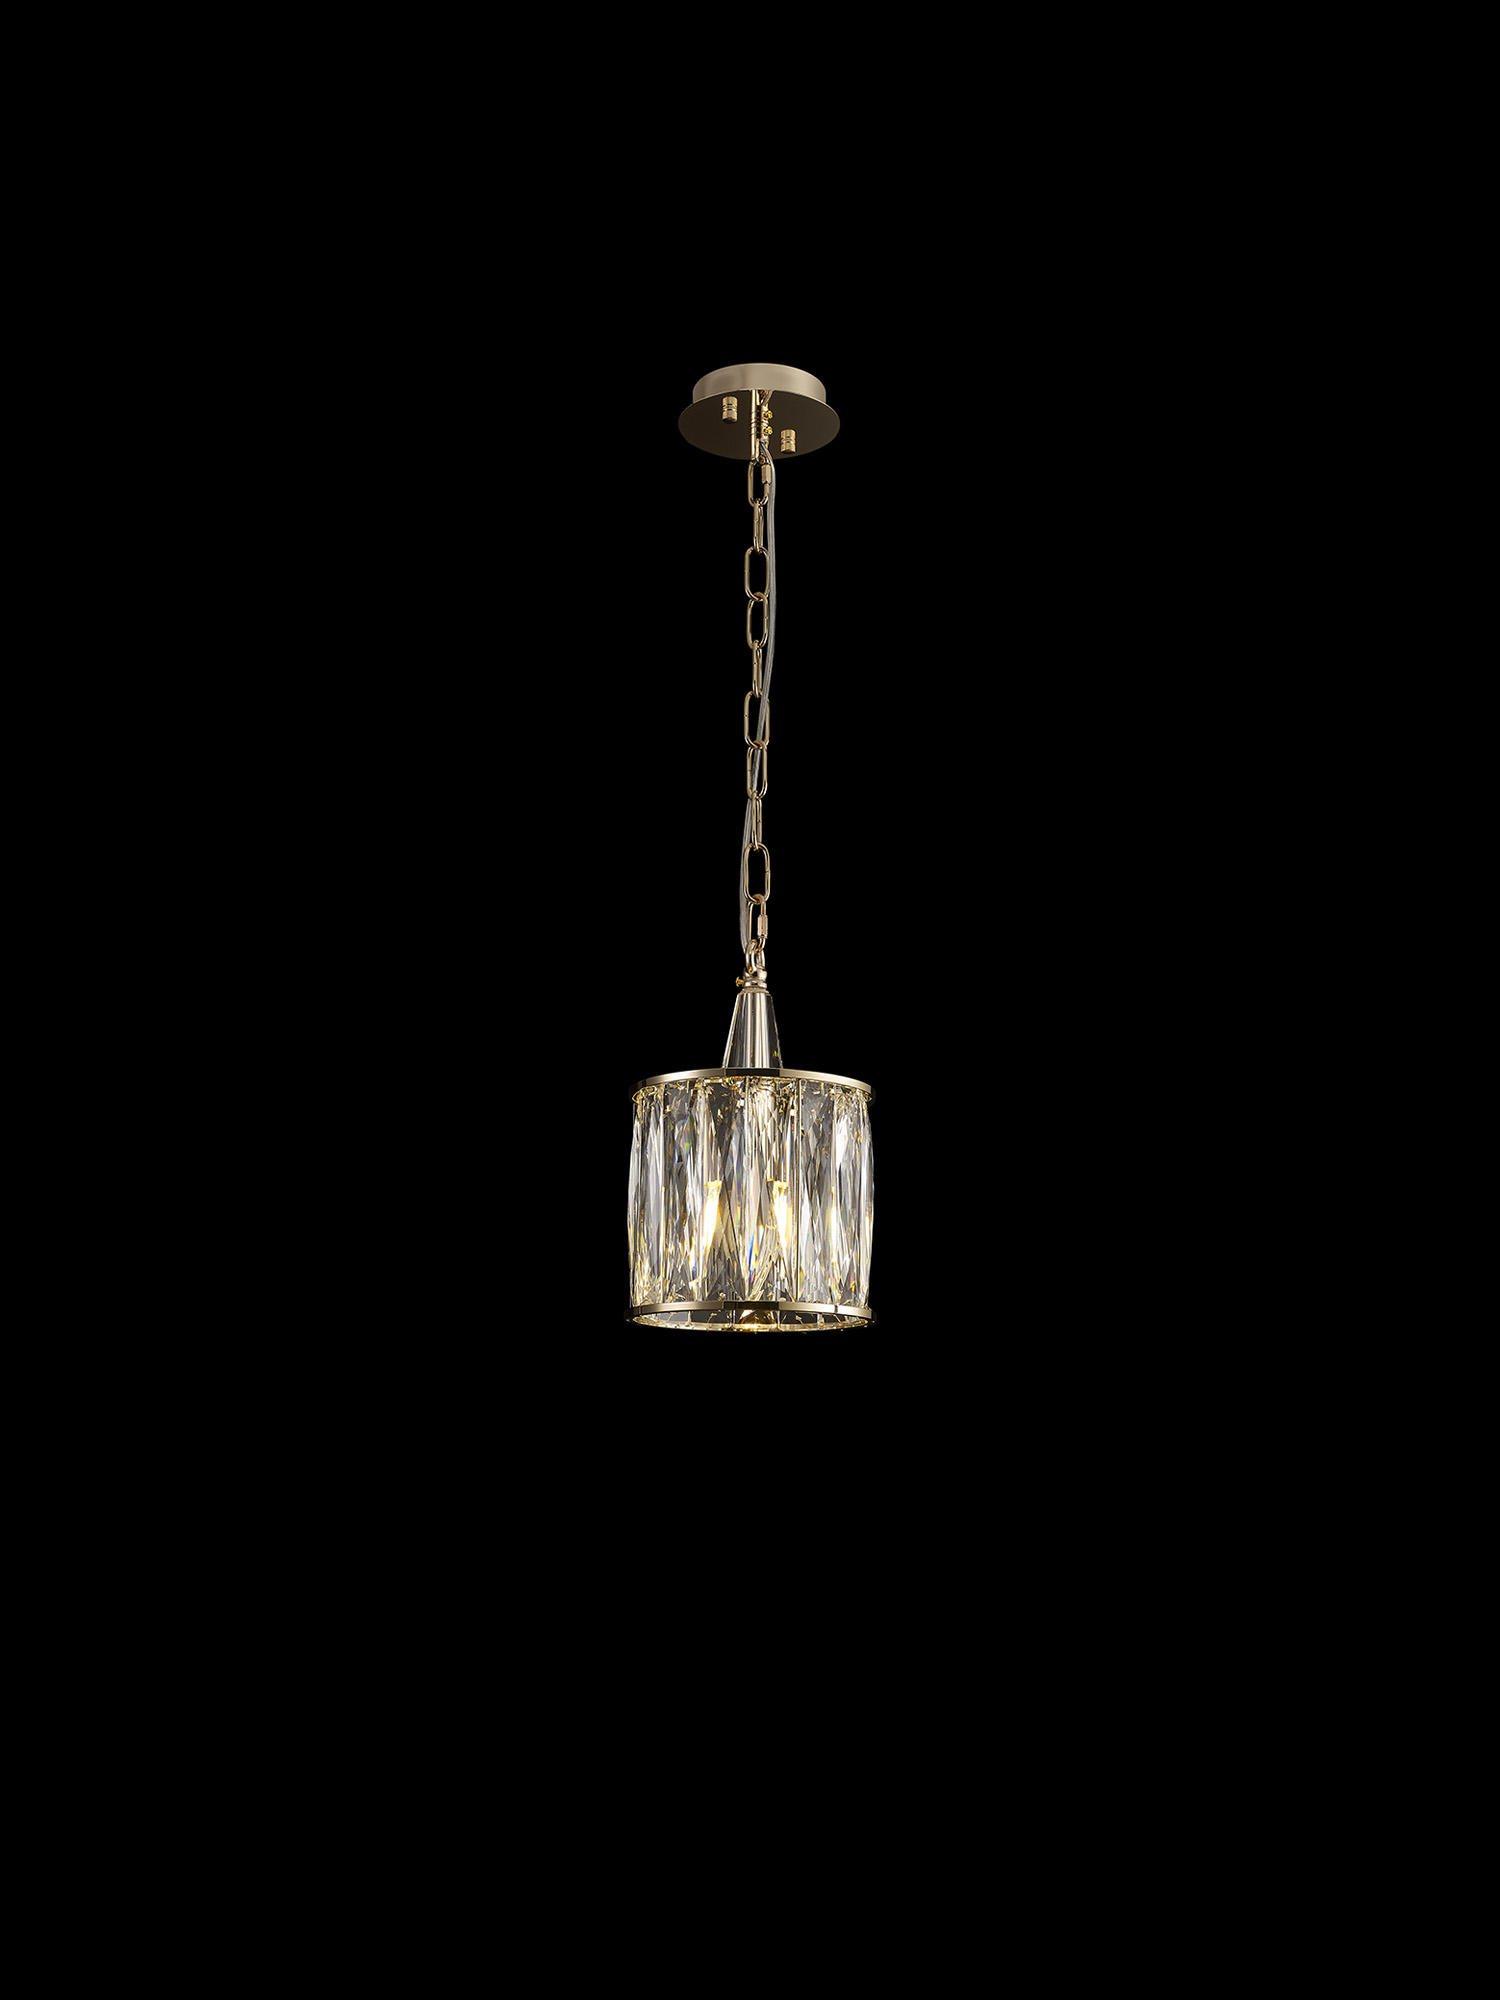 Vivienne French Gold Crystal Ceiling Lights Diyas Ringed & Square Crystal Fittings